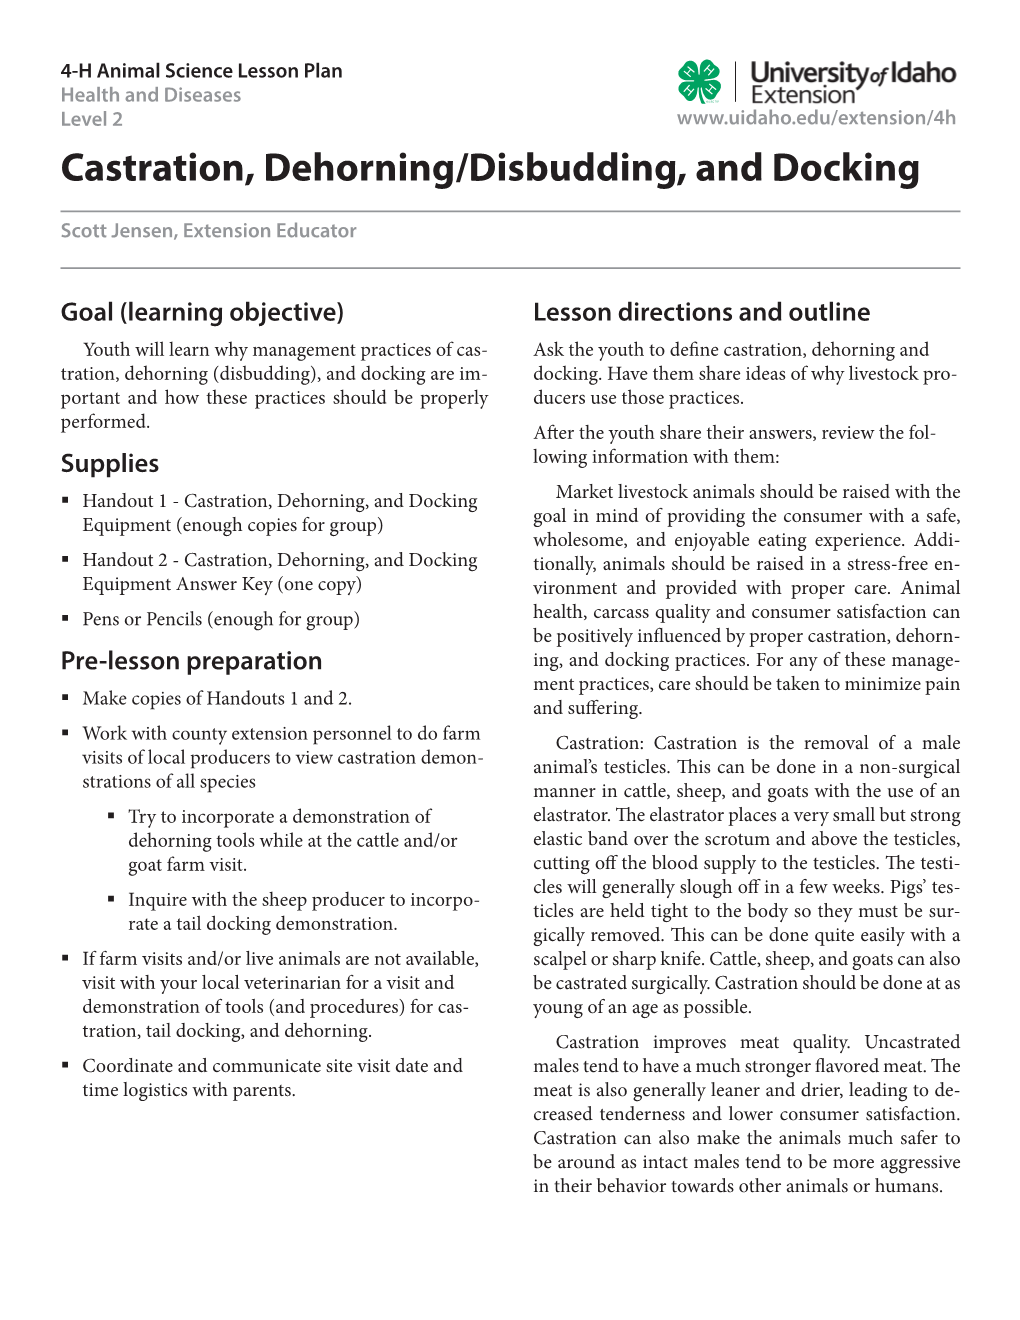 Castration, Dehorning/Disbudding, and Docking